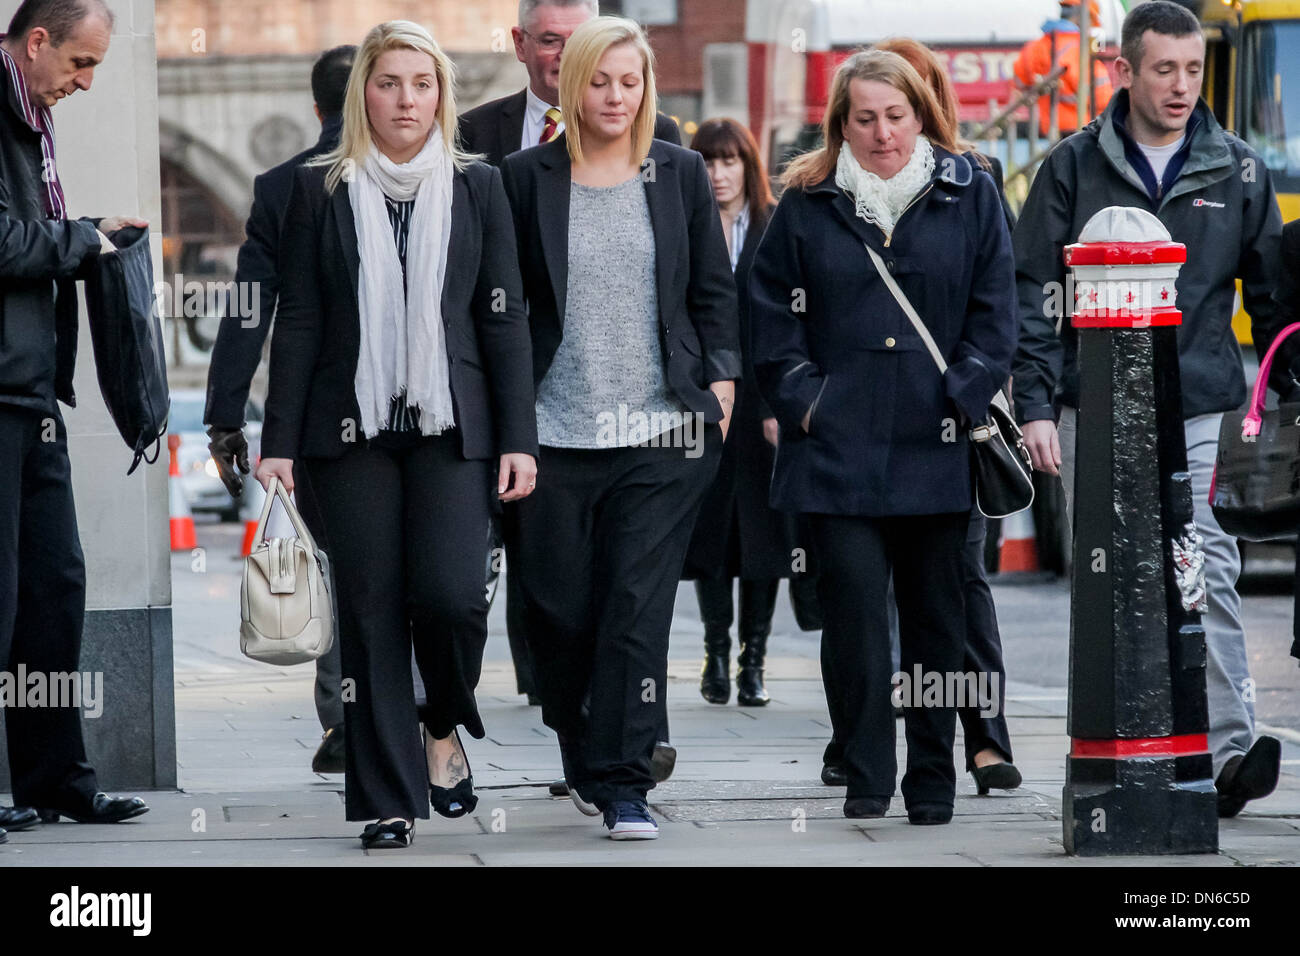 Lee Rigby Family arrive at Old Bailey court for trial verdict in London. Stock Photo